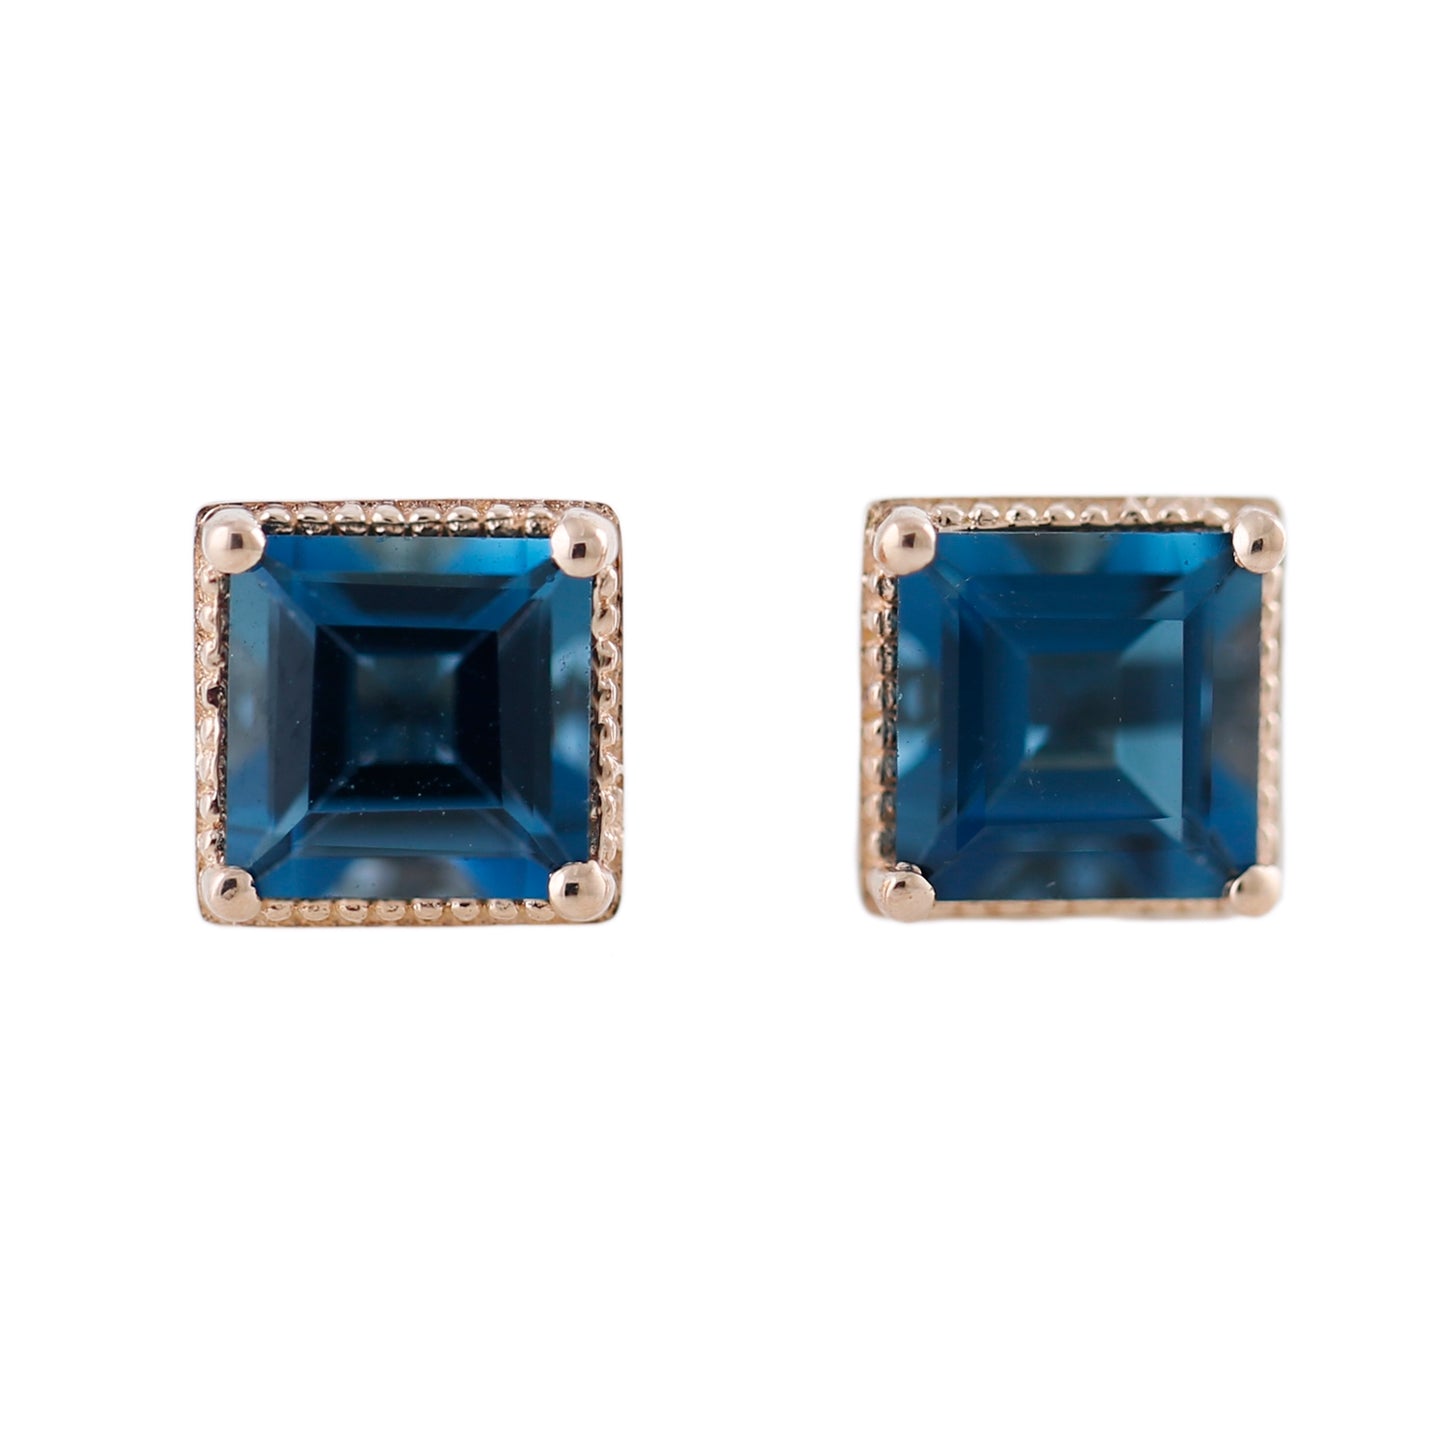 Pinctore 14K Rose Gold Over Ster Silver 2.4ctw London Blue Topaz Square Shaped Earrings - pinctore